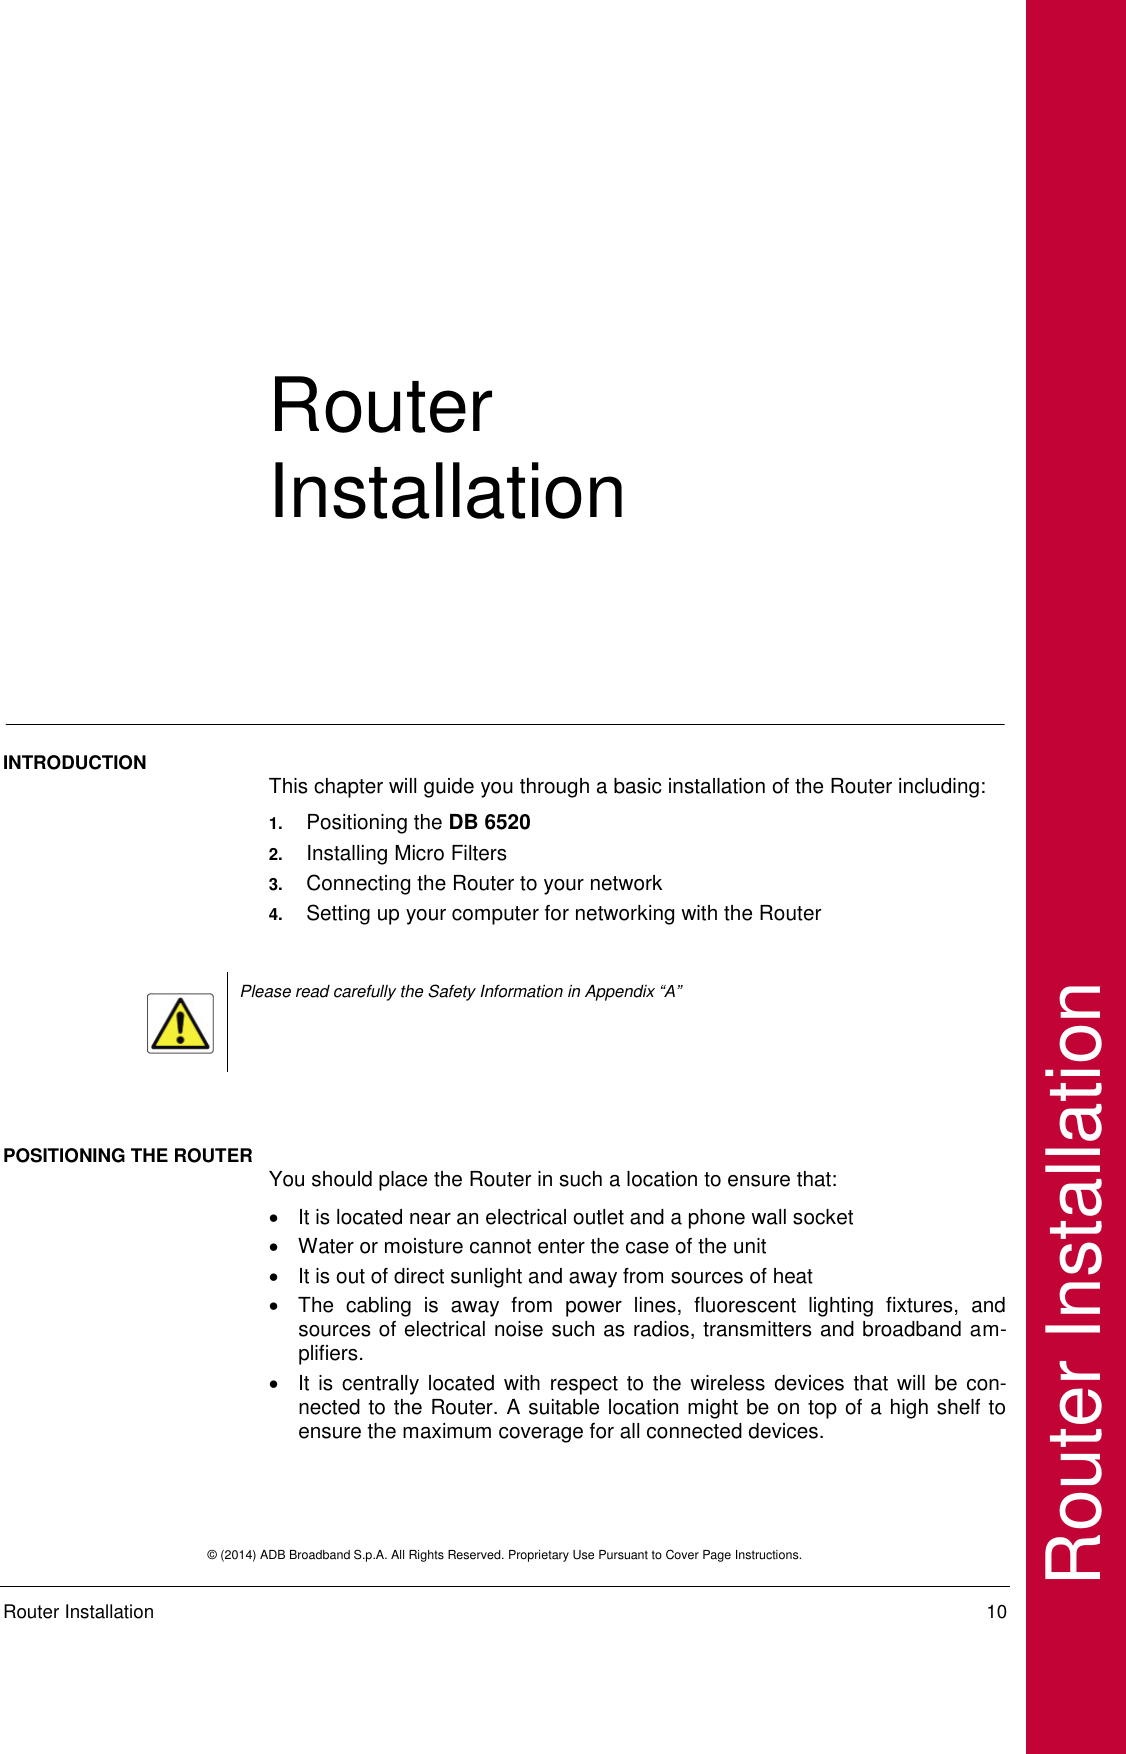  © (2014) ADB Broadband S.p.A. All Rights Reserved. Proprietary Use Pursuant to Cover Page Instructions.   Router Installation    10 Router Installation Router Installation INTRODUCTION  This chapter will guide you through a basic installation of the Router including: 1. Positioning the DB 6520  2. Installing Micro Filters 3. Connecting the Router to your network 4. Setting up your computer for networking with the Router   Please read carefully the Safety Information in Appendix “A”   POSITIONING THE ROUTER You should place the Router in such a location to ensure that:   It is located near an electrical outlet and a phone wall socket   Water or moisture cannot enter the case of the unit   It is out of direct sunlight and away from sources of heat   The  cabling  is  away  from  power  lines,  fluorescent  lighting  fixtures,  and sources of electrical noise such as radios, transmitters and broadband am-plifiers.   It is centrally located  with respect to  the wireless  devices that  will be con-nected to the Router. A suitable location might be on top of a high shelf to ensure the maximum coverage for all connected devices. 